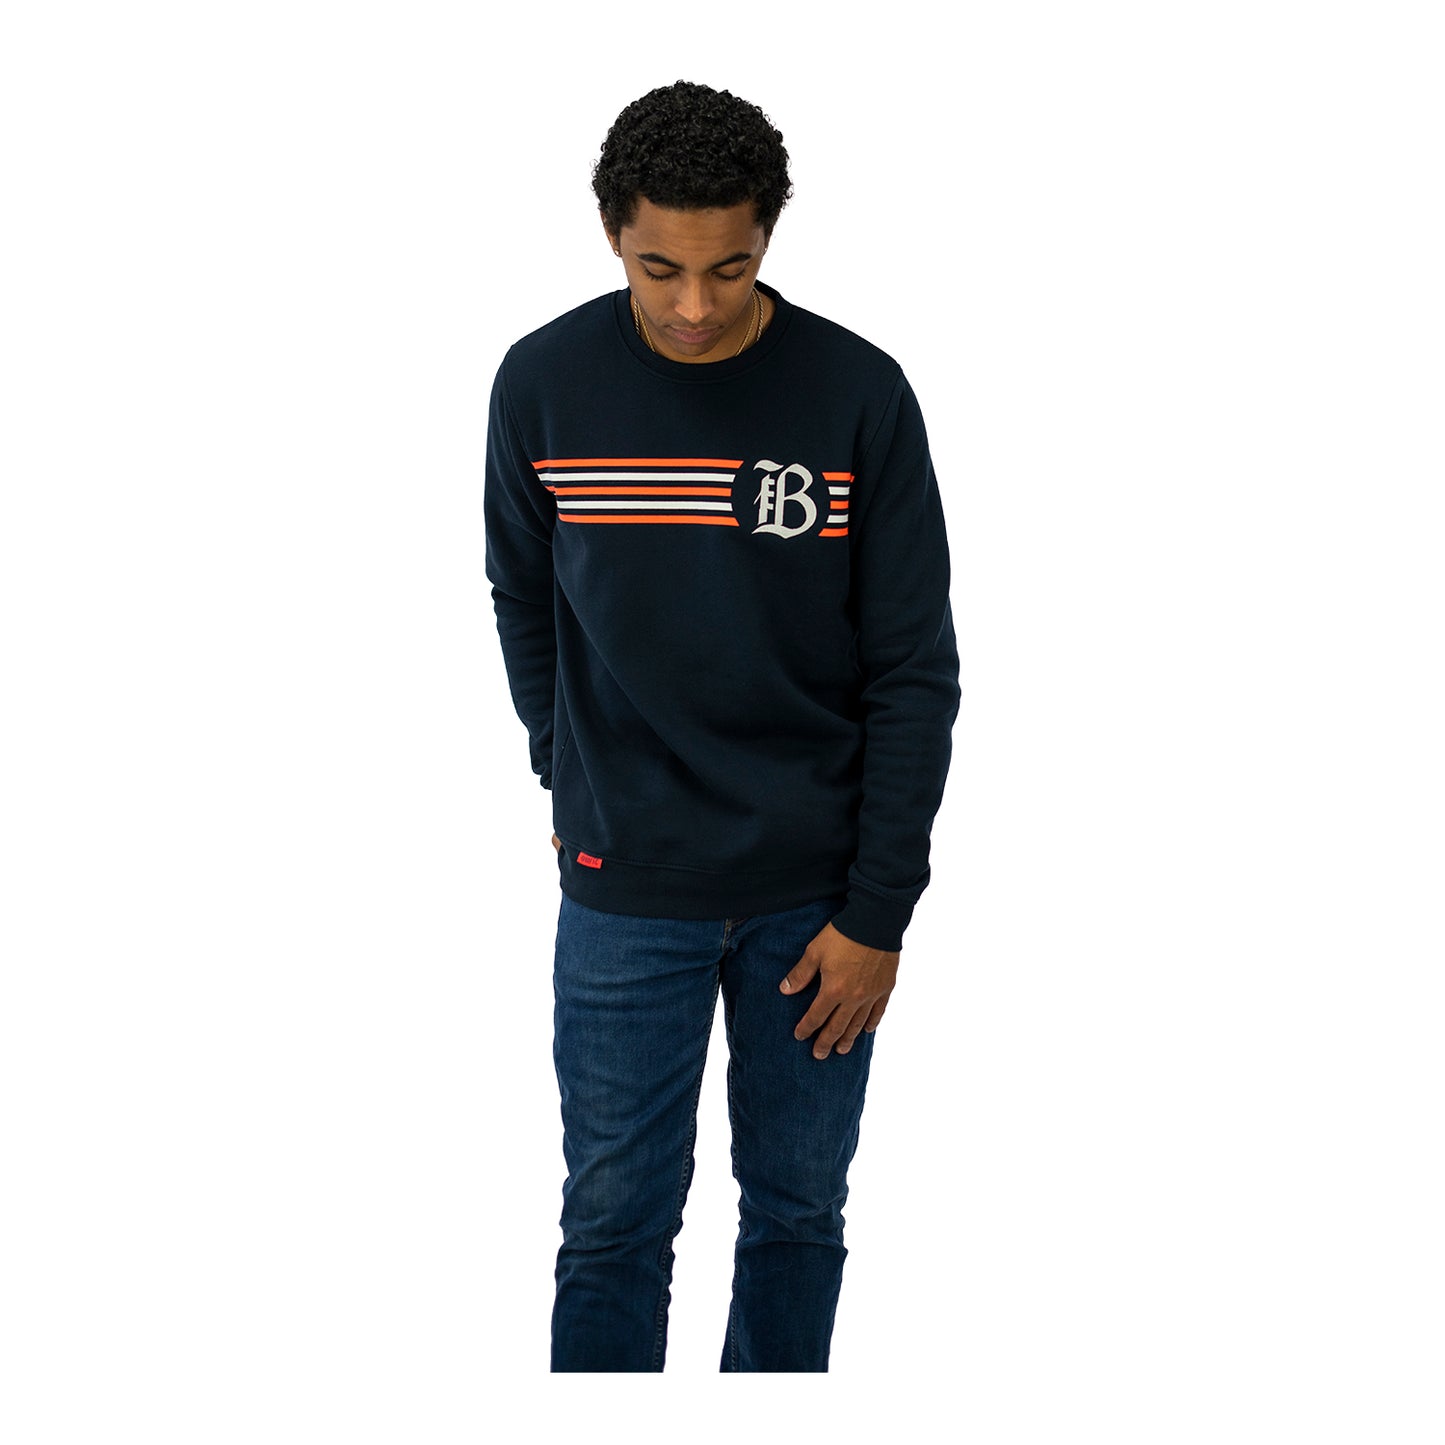 Unisex Official Bay FC Striped Navy Crewneck - On Model Front View